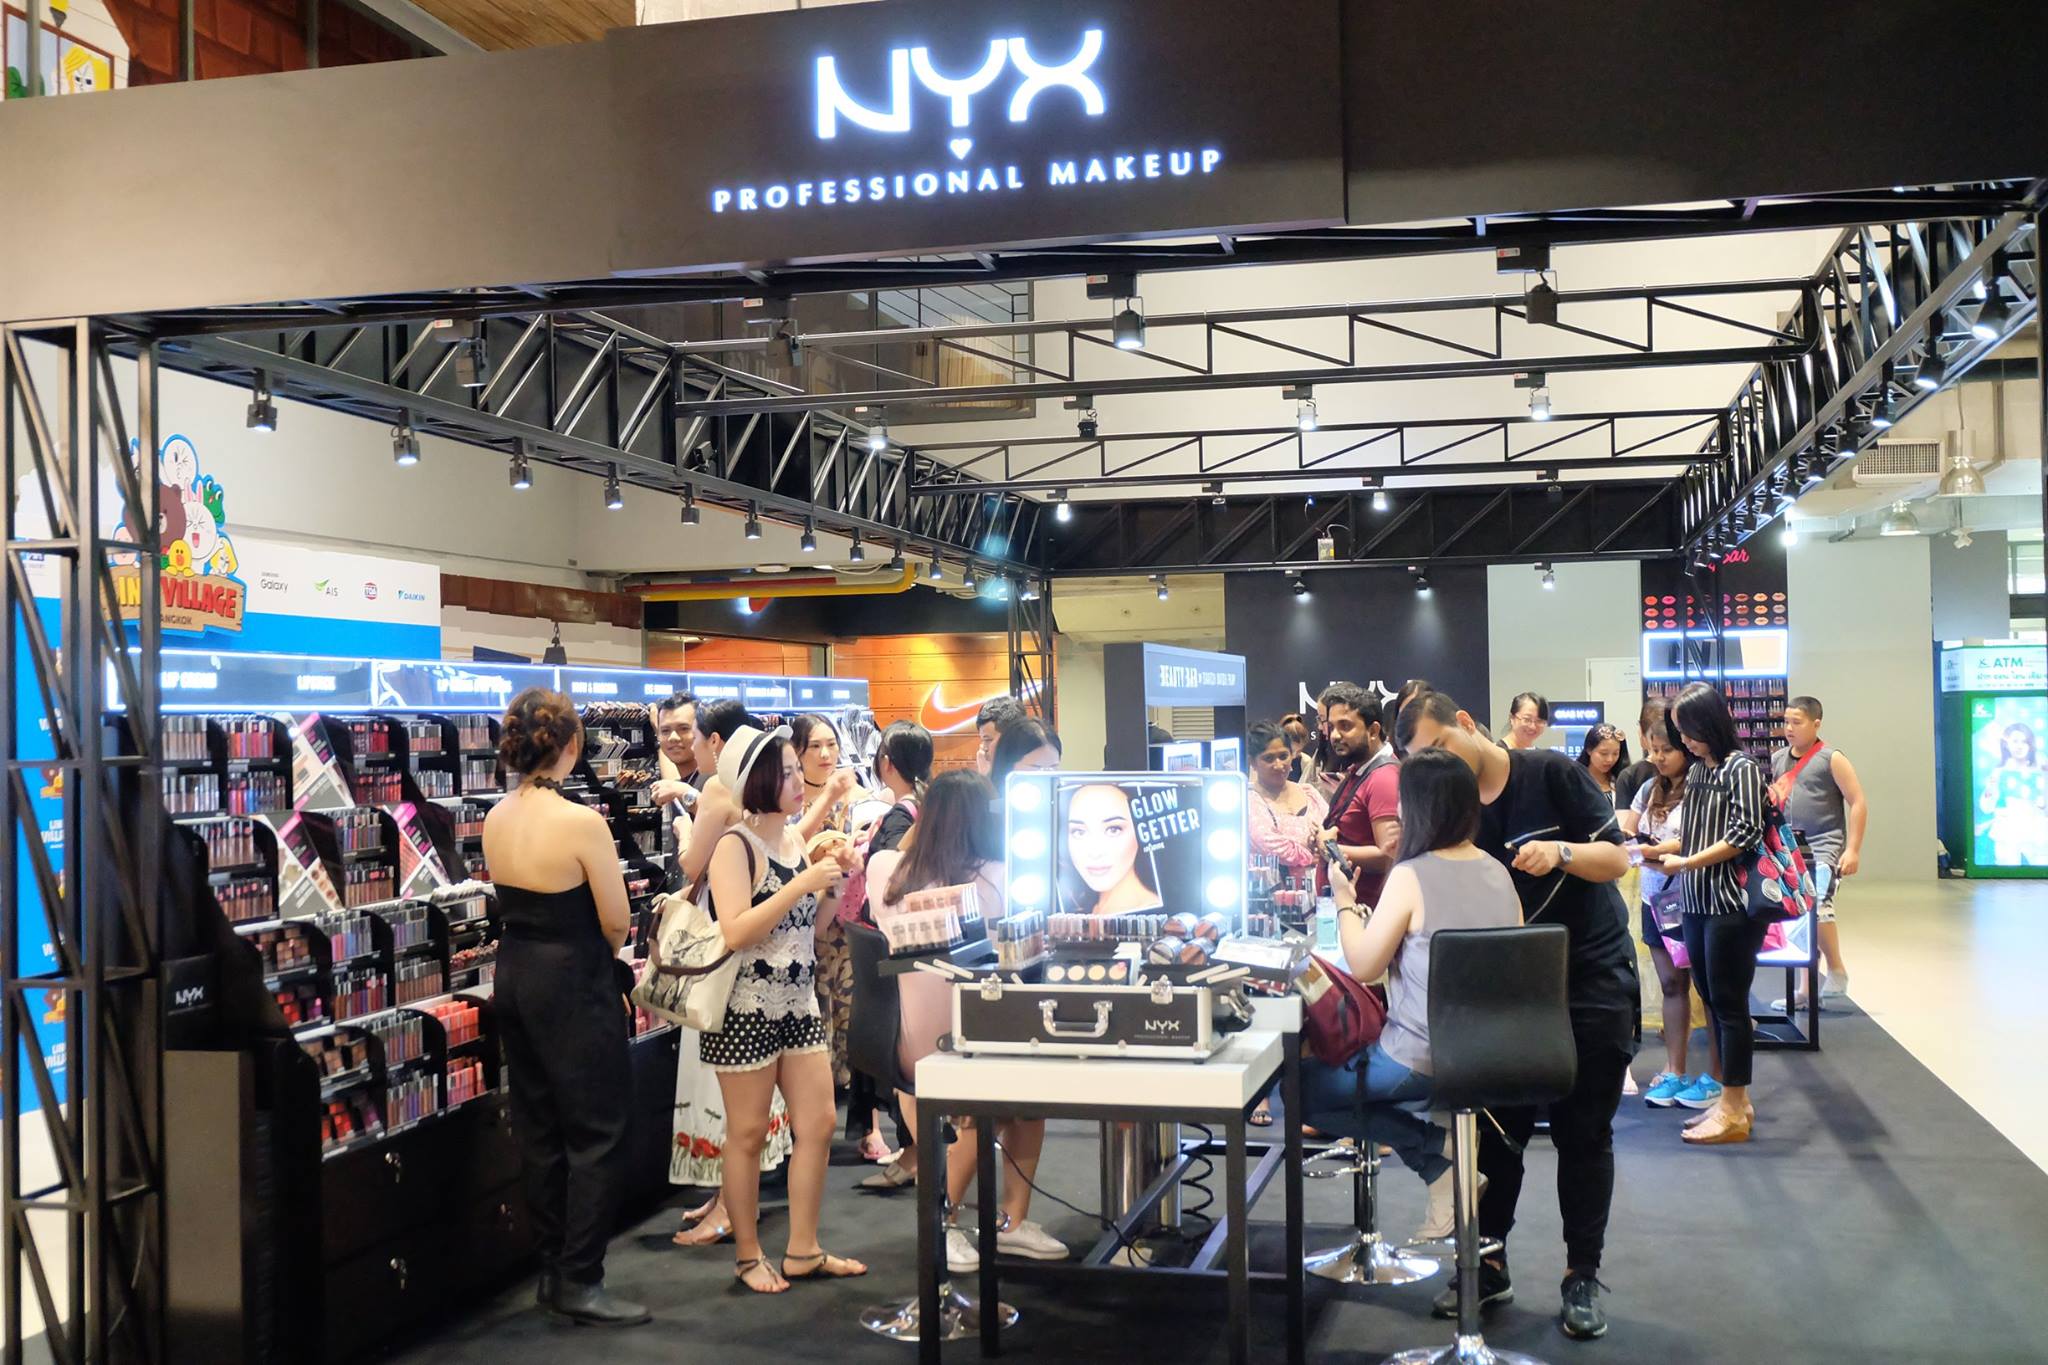 File photo of the Nyx cosmetic store at Siam Square One shopping mall. Photo: Siam Square One
